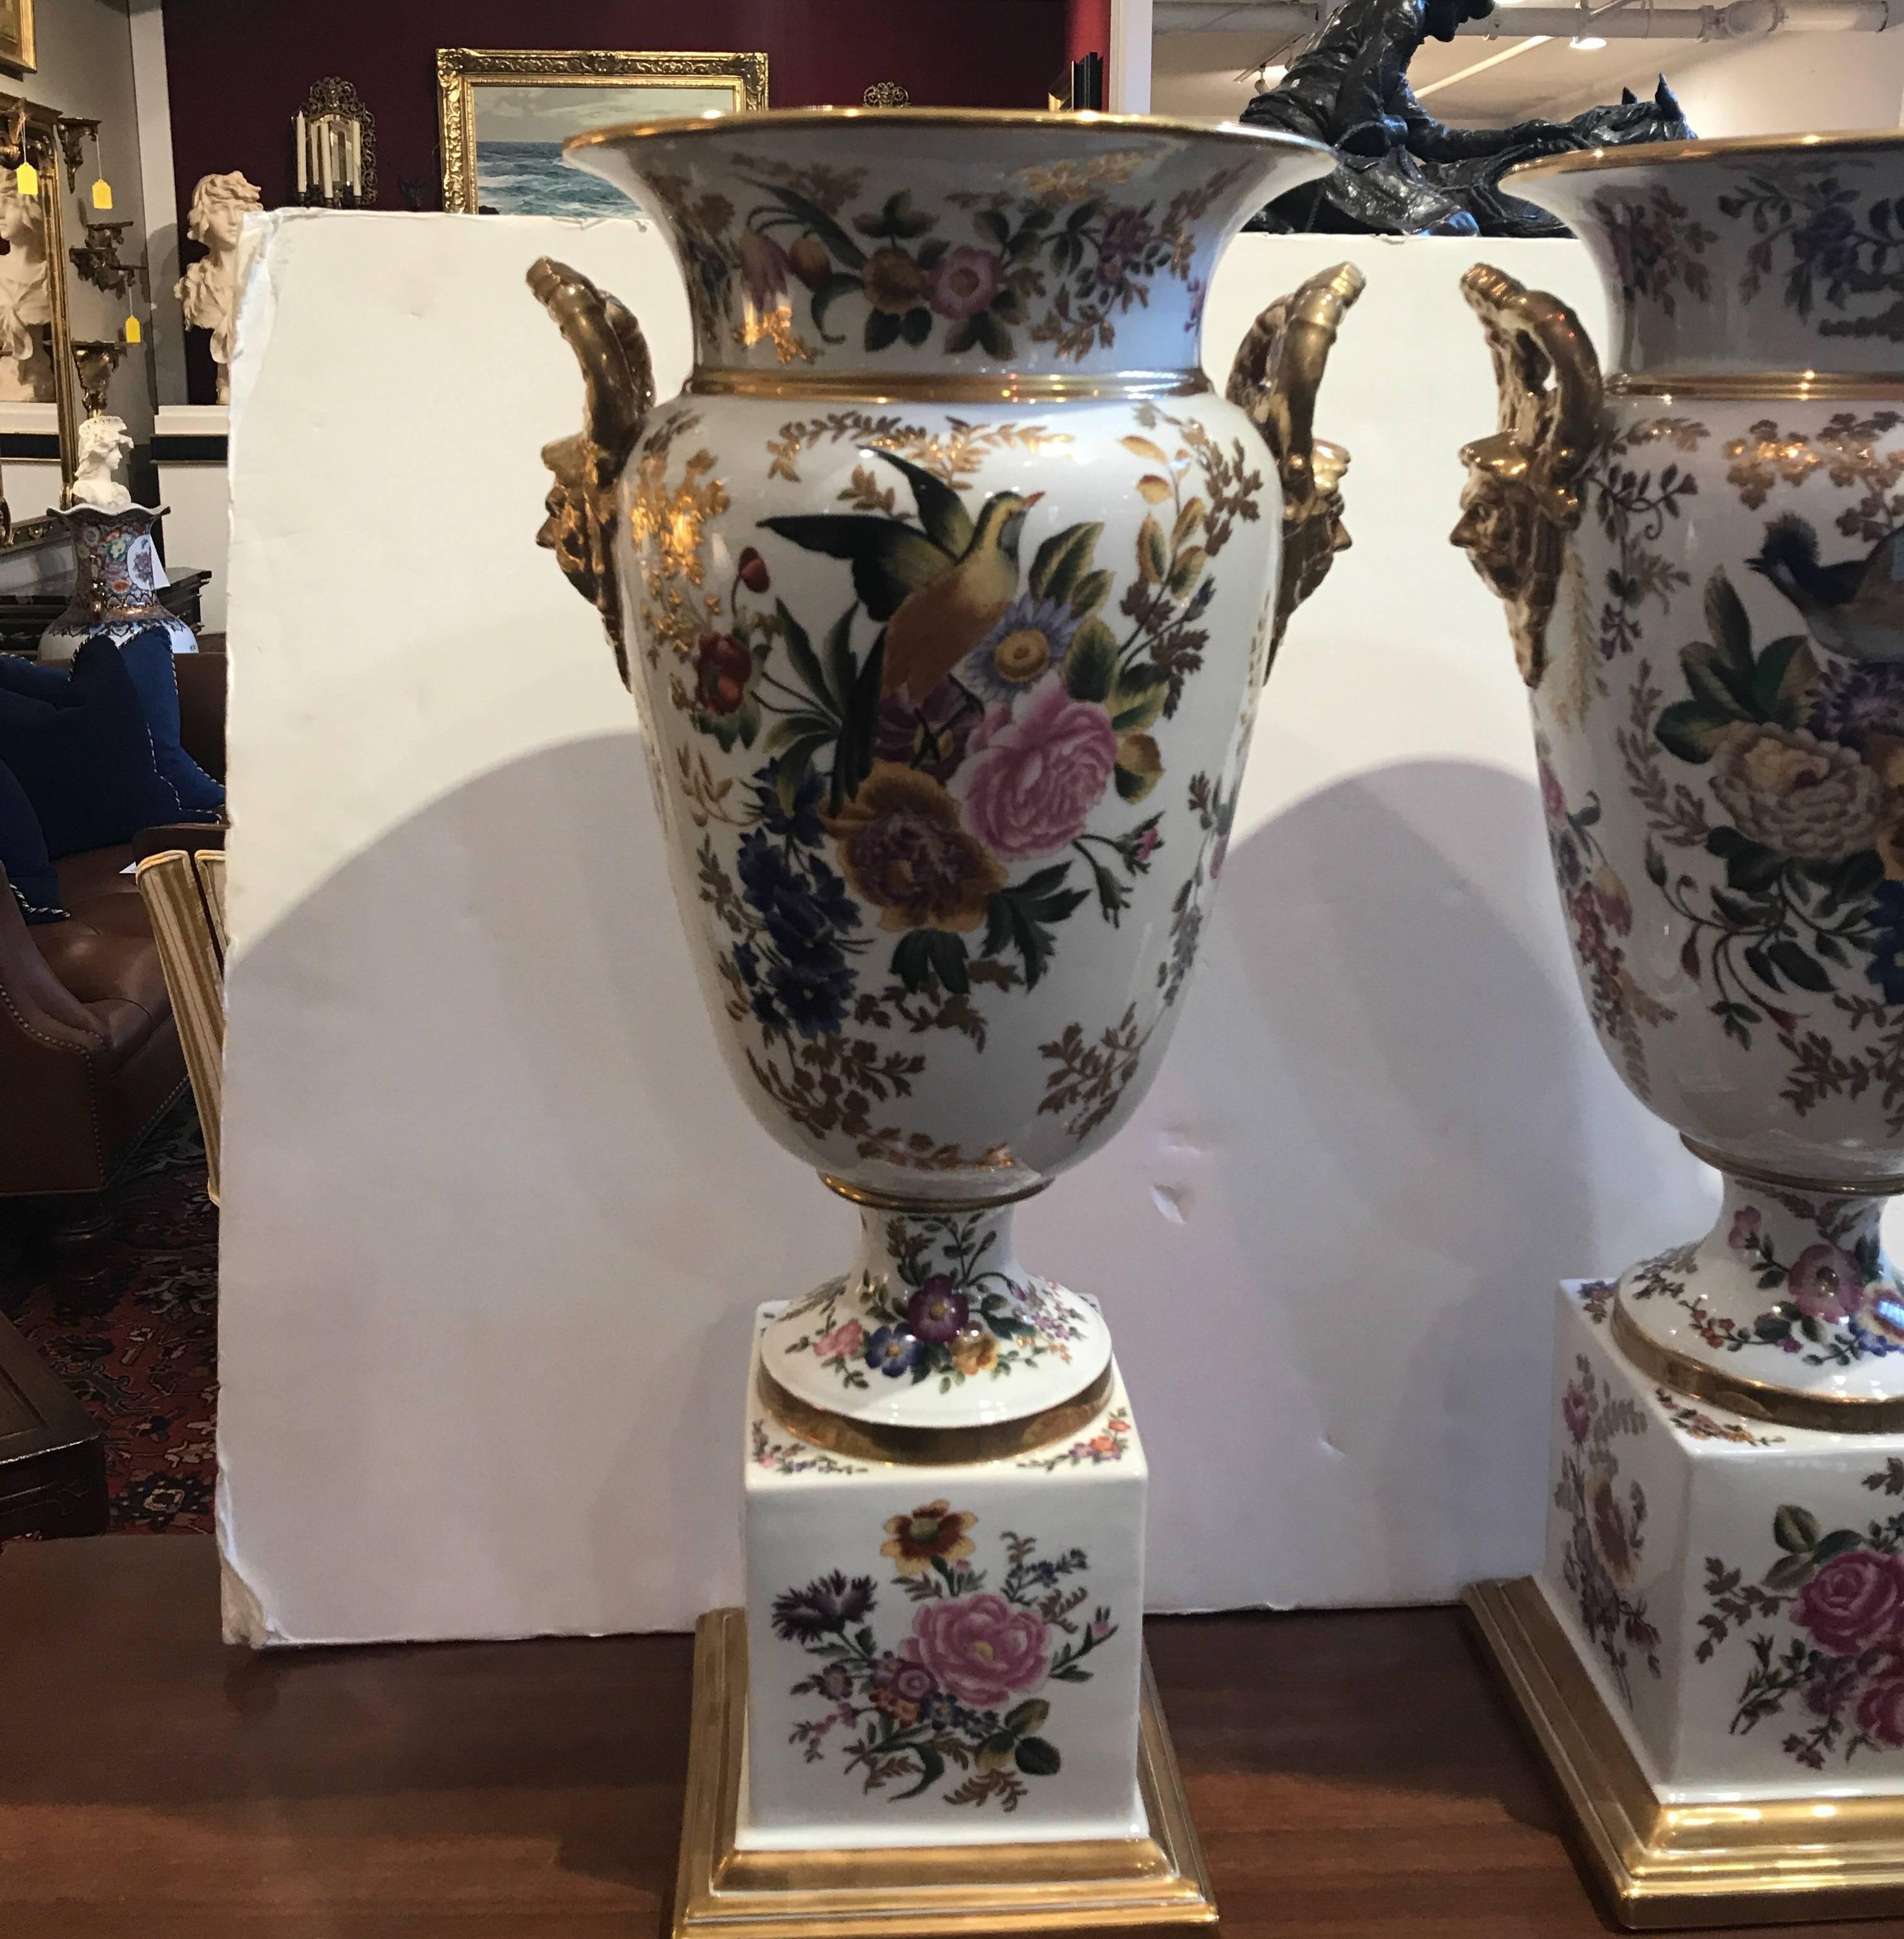 Elegant and grand hand-painted porcelain urns in the style of Old Paris. These are made by Chelsea House. These are of large size and scale with impressive hand-painted birds and floral decoration in the old Paris porcelain style of the 19th